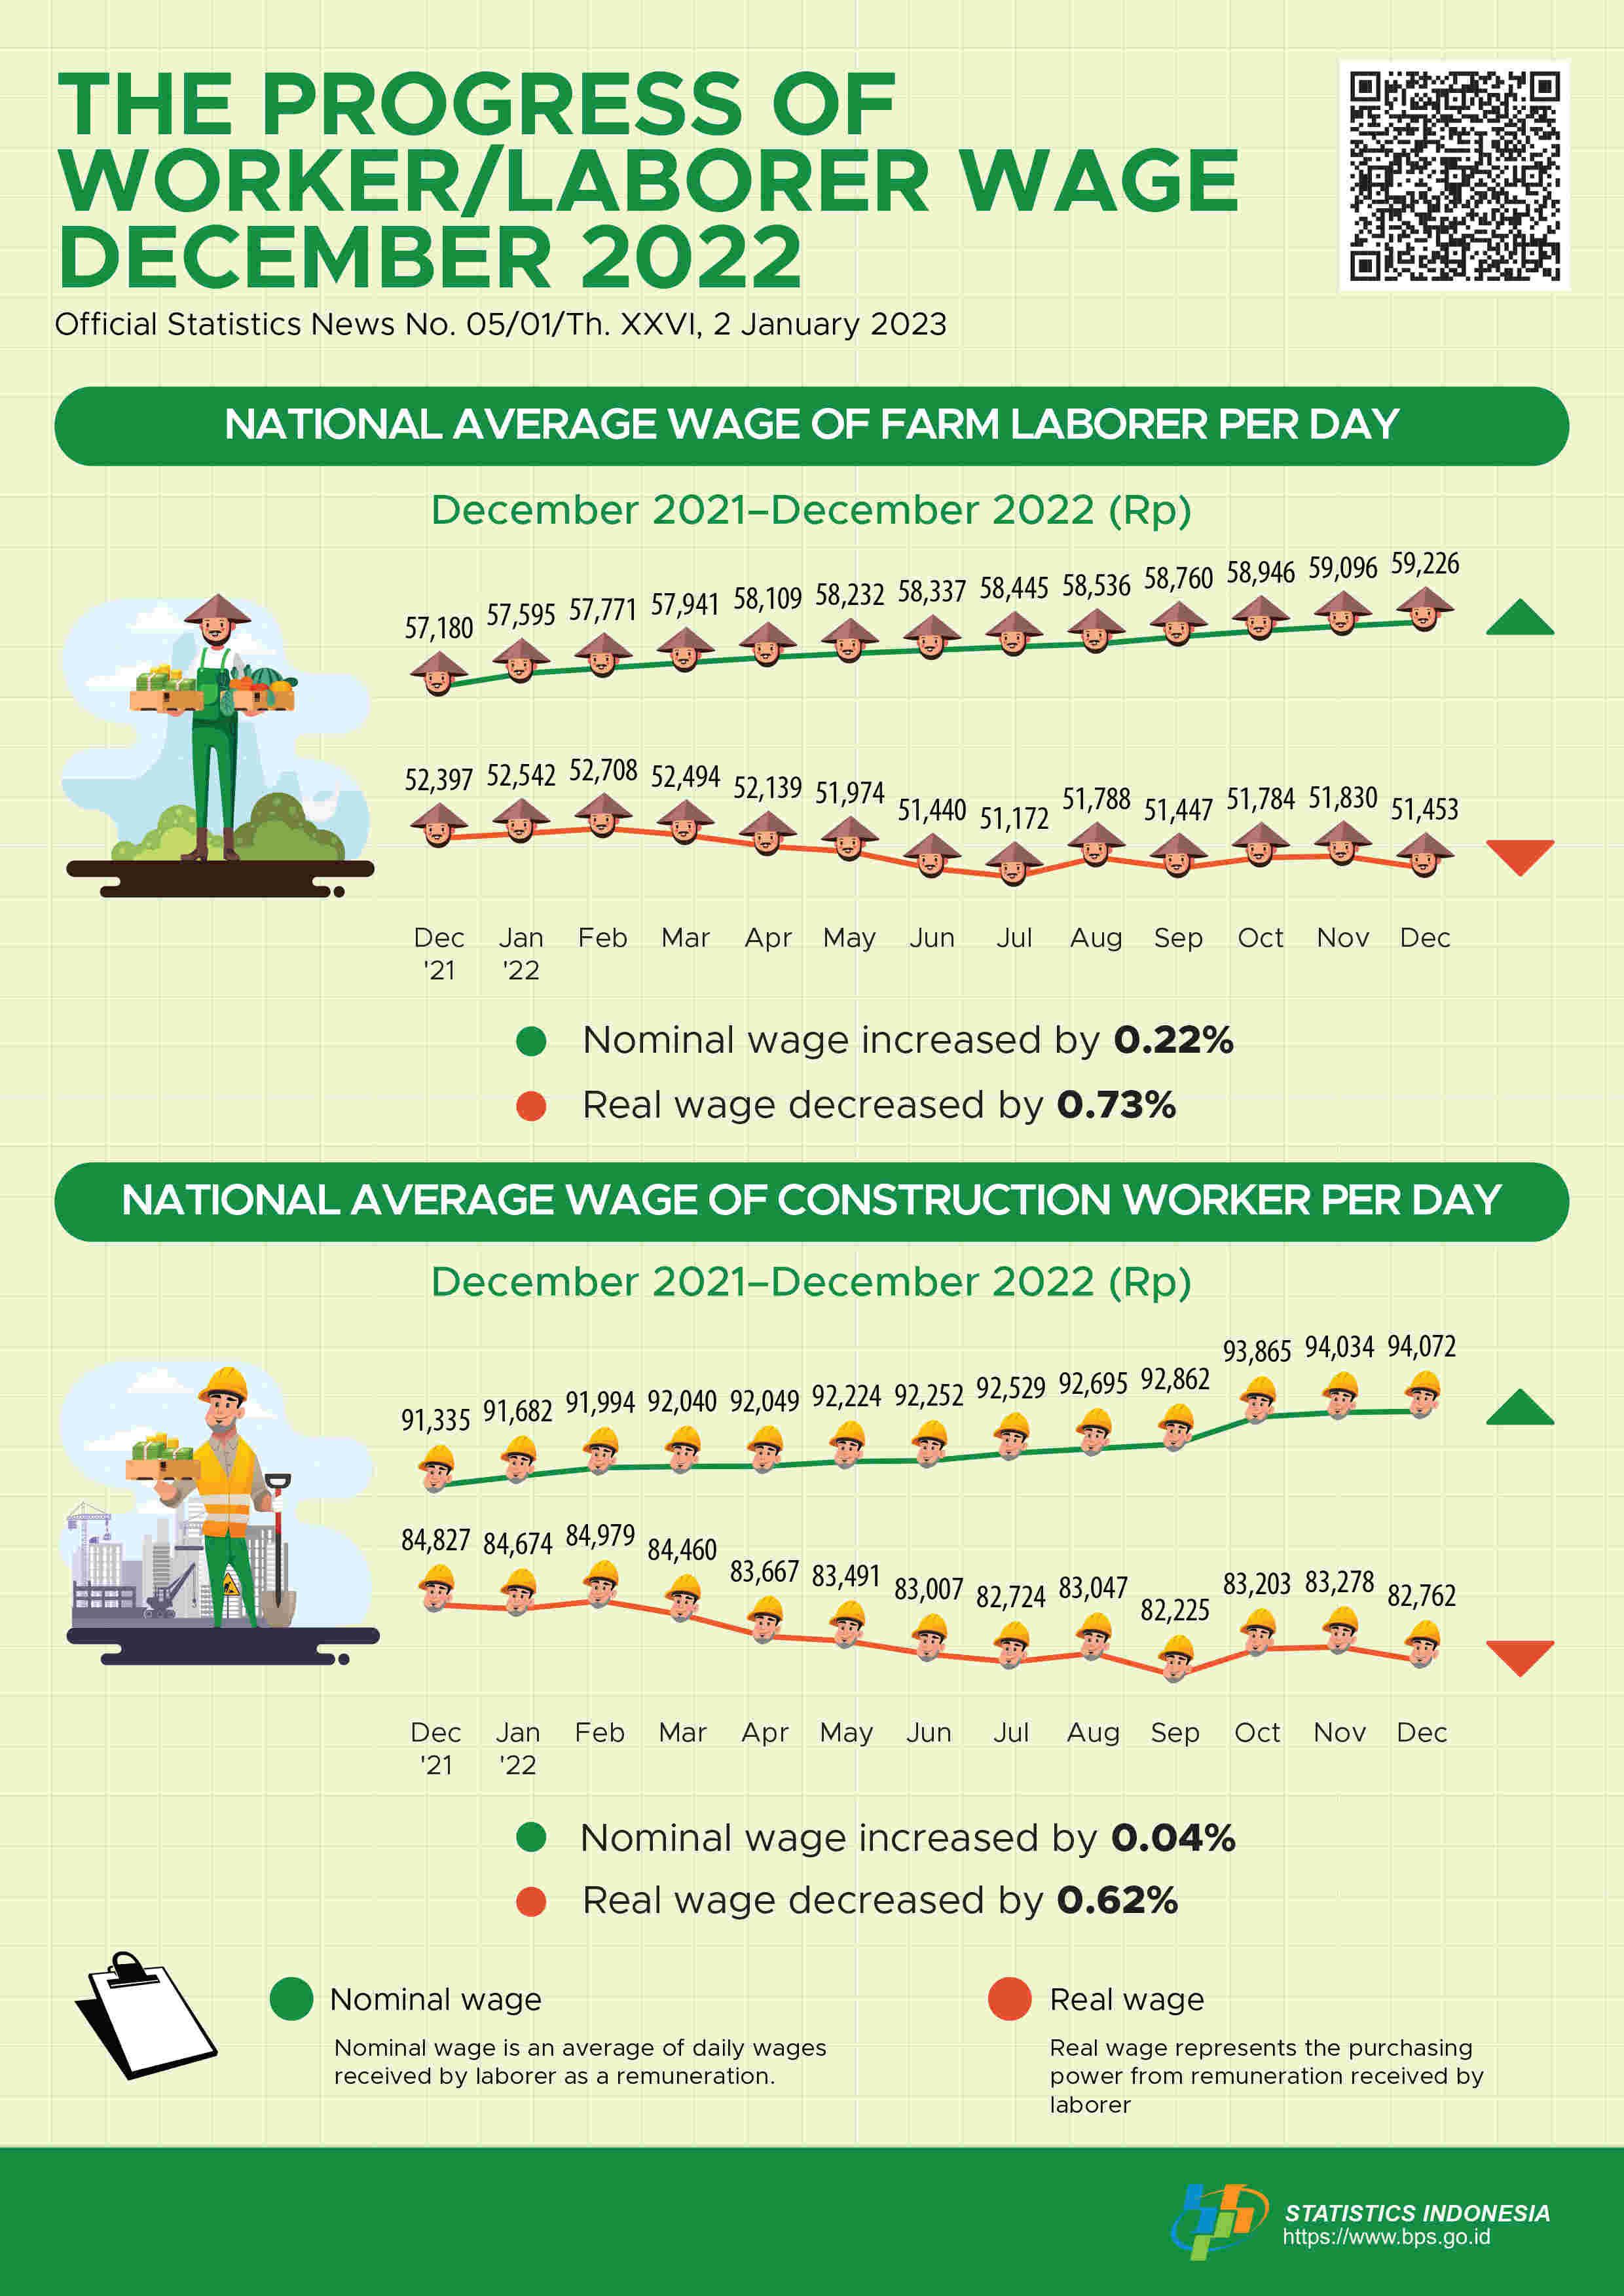 In December 2022 National Average of Nominal Wage of Farm Laborer per day increased by 0.22 Percent.